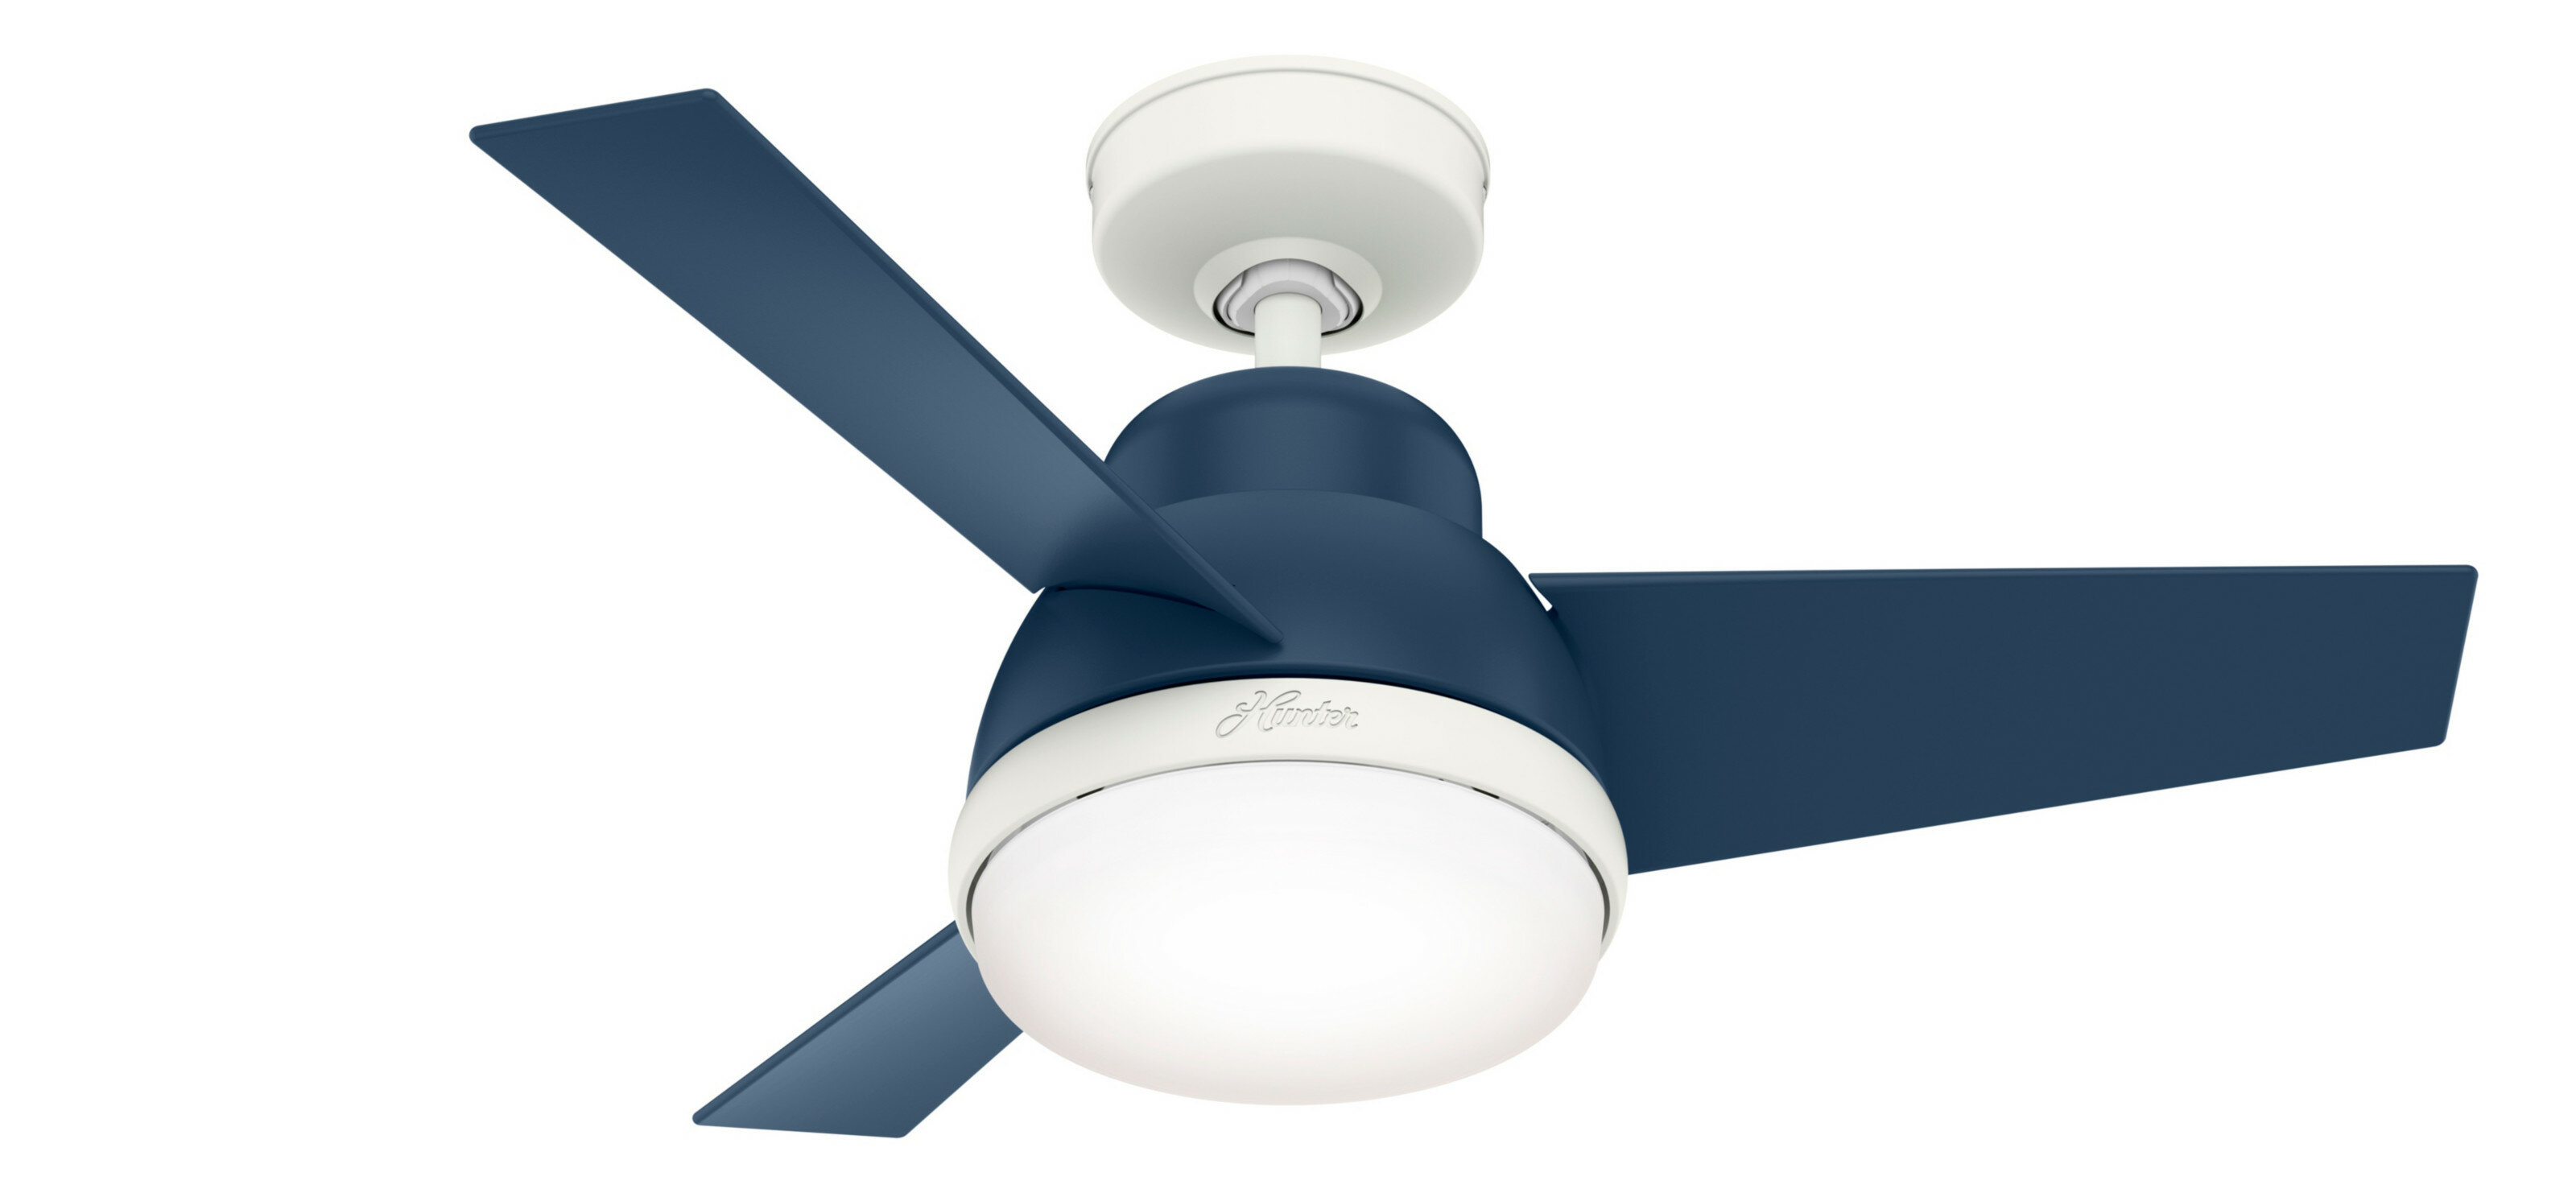 36 Valda 3 Blade Standard Ceiling Fan With Fan Control Parts And Light Kit Reviews Allmodern